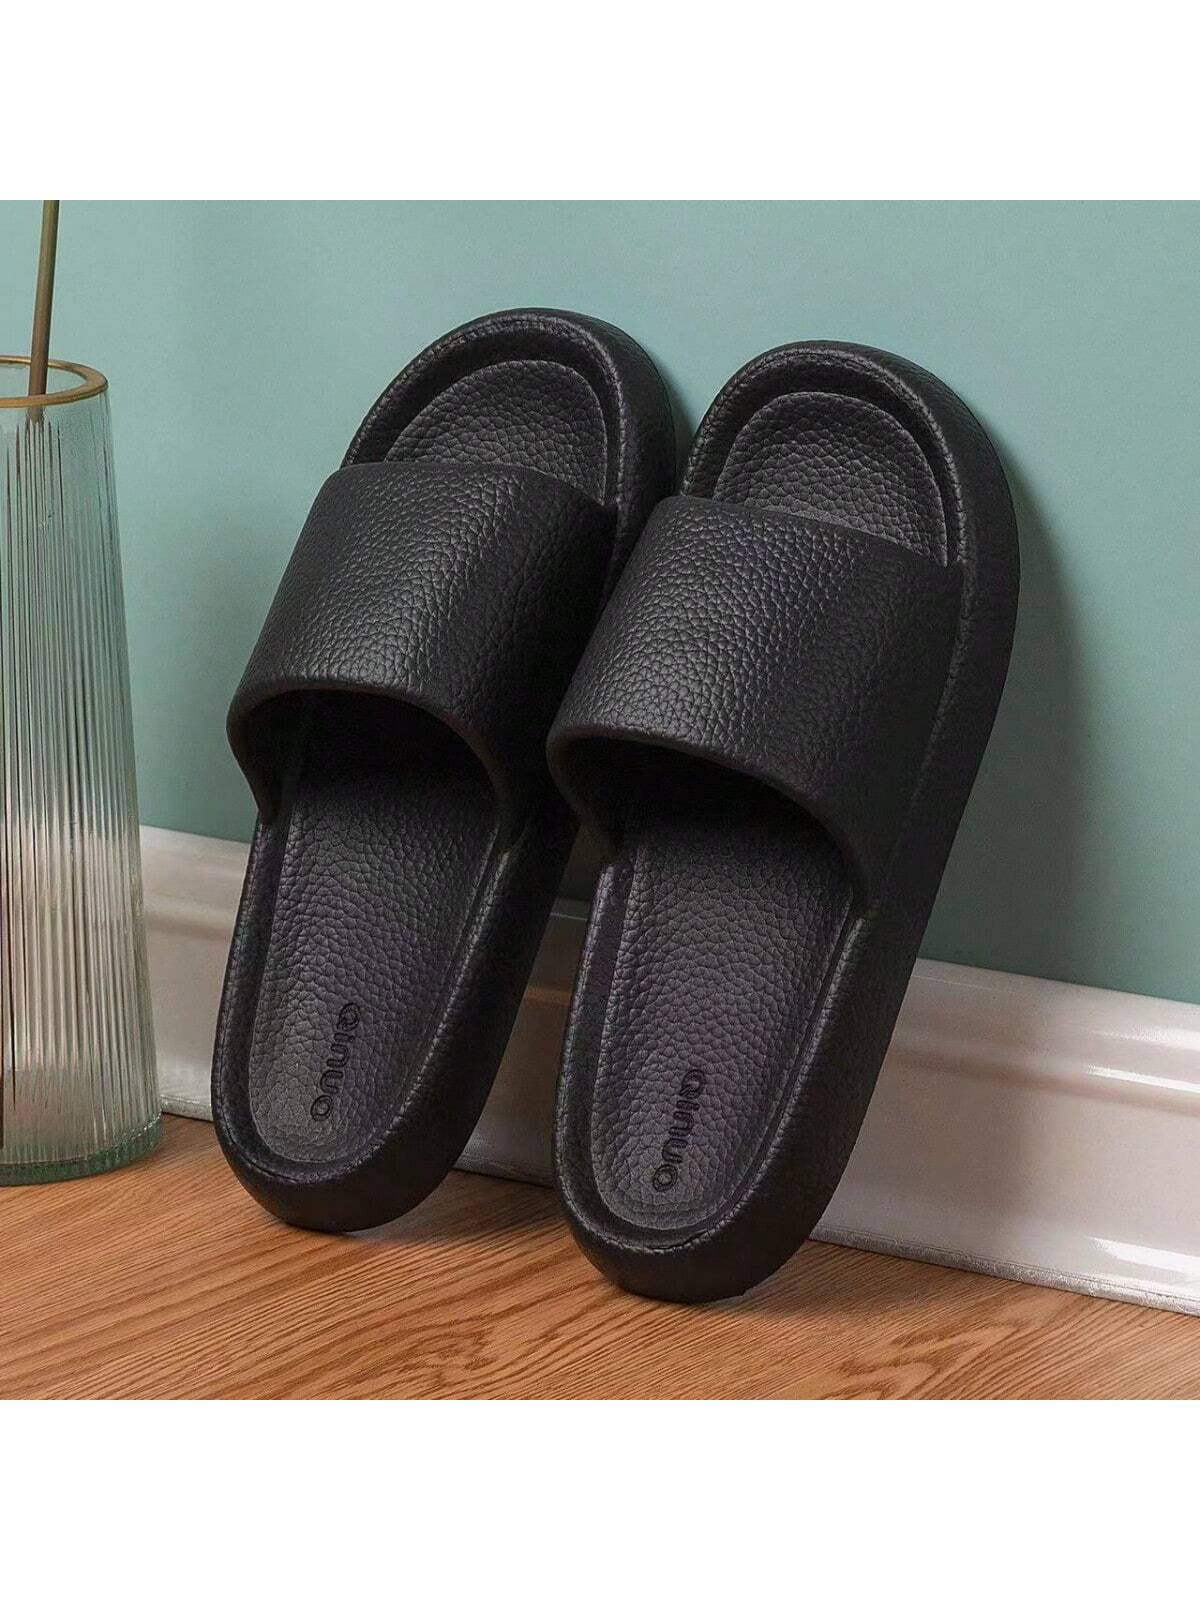 New Couple Pu Leather Soft Indoor Outdoor Cool Slippers, , Odorless, Anti-slip, Soft Bottom, Non-slip, Wear-resistant, Soft & Comfortable, Fashionable Design, Home Wear, Eva Sole, Beach Slipper